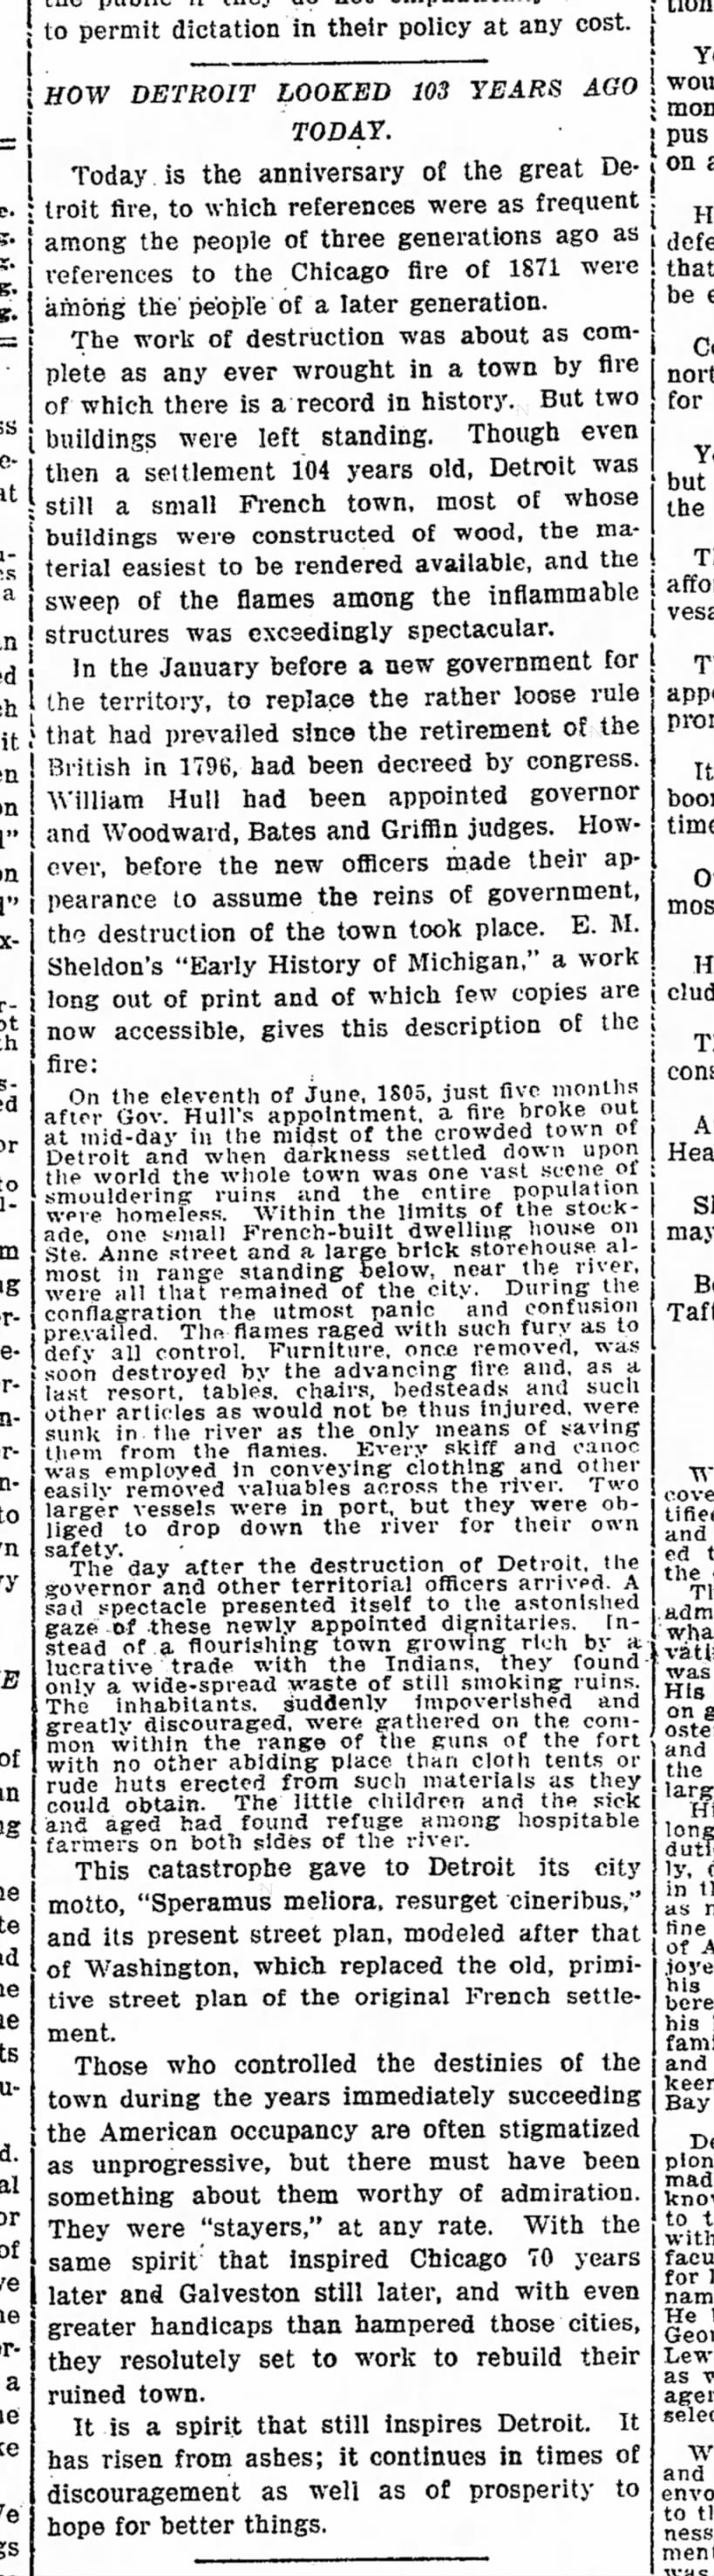 1908 - article about the 1805 Detroit fire and historic info. about detroit